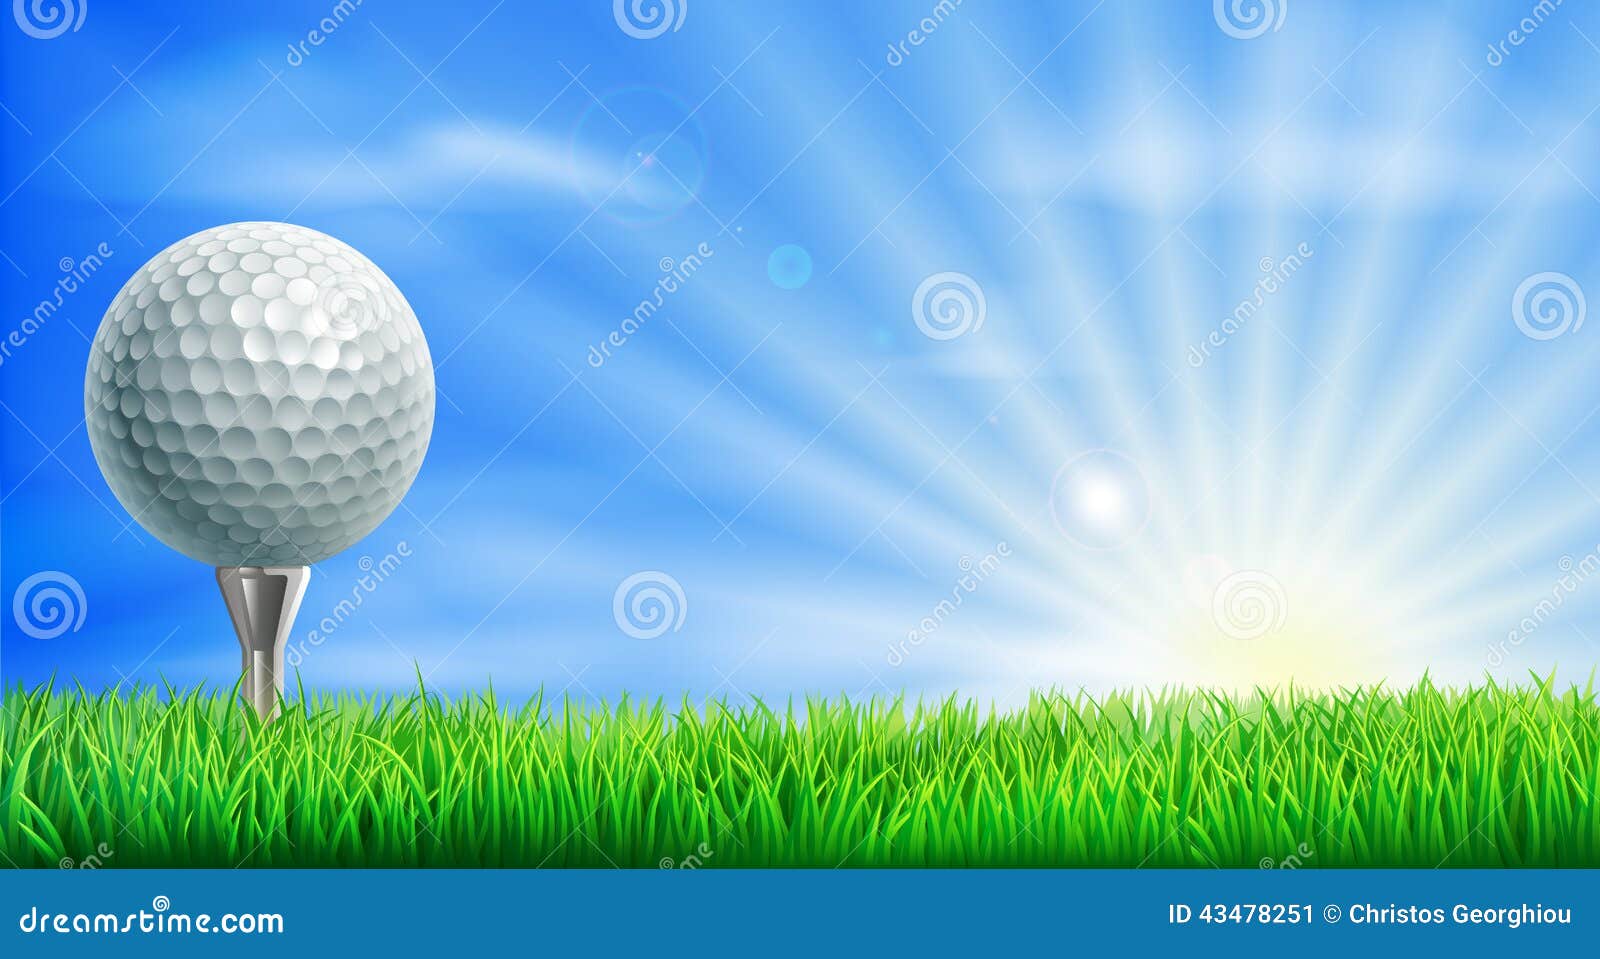 golf course ball and tee